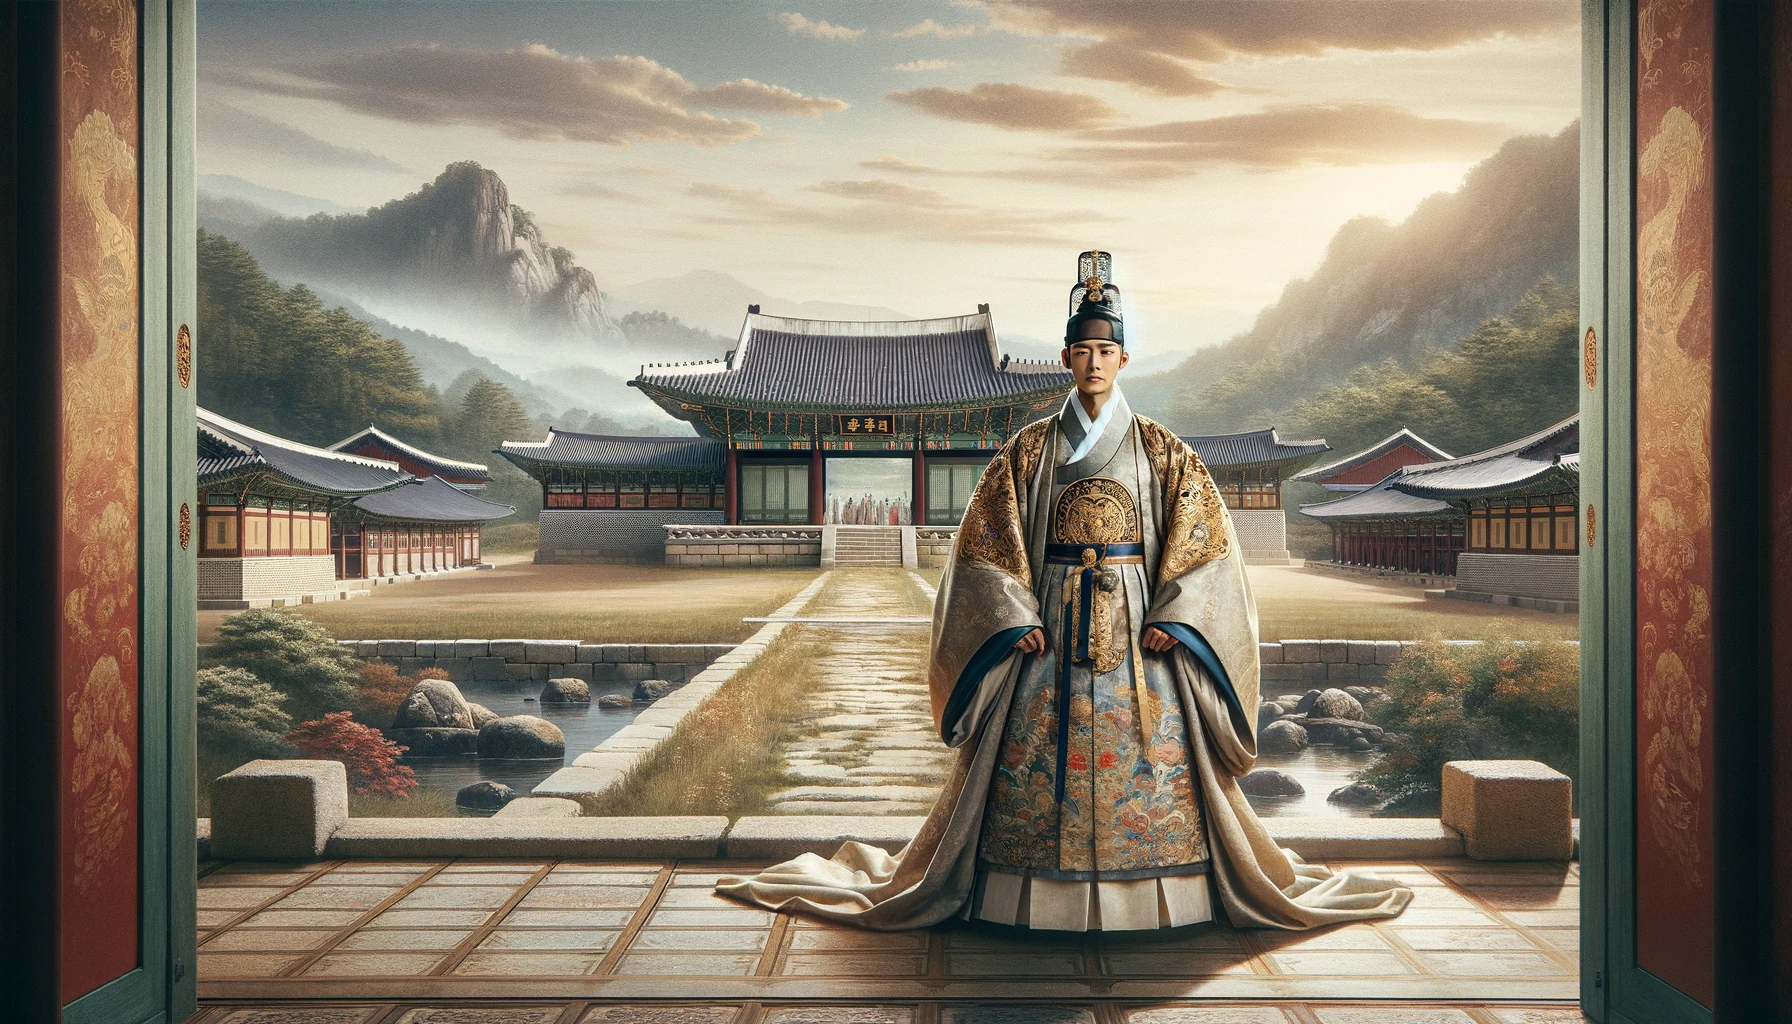 The Joseon Dynasty of Korea was founded in July 1392 by Yi Seong-gye after the collapse of the Goryeo dynasty.